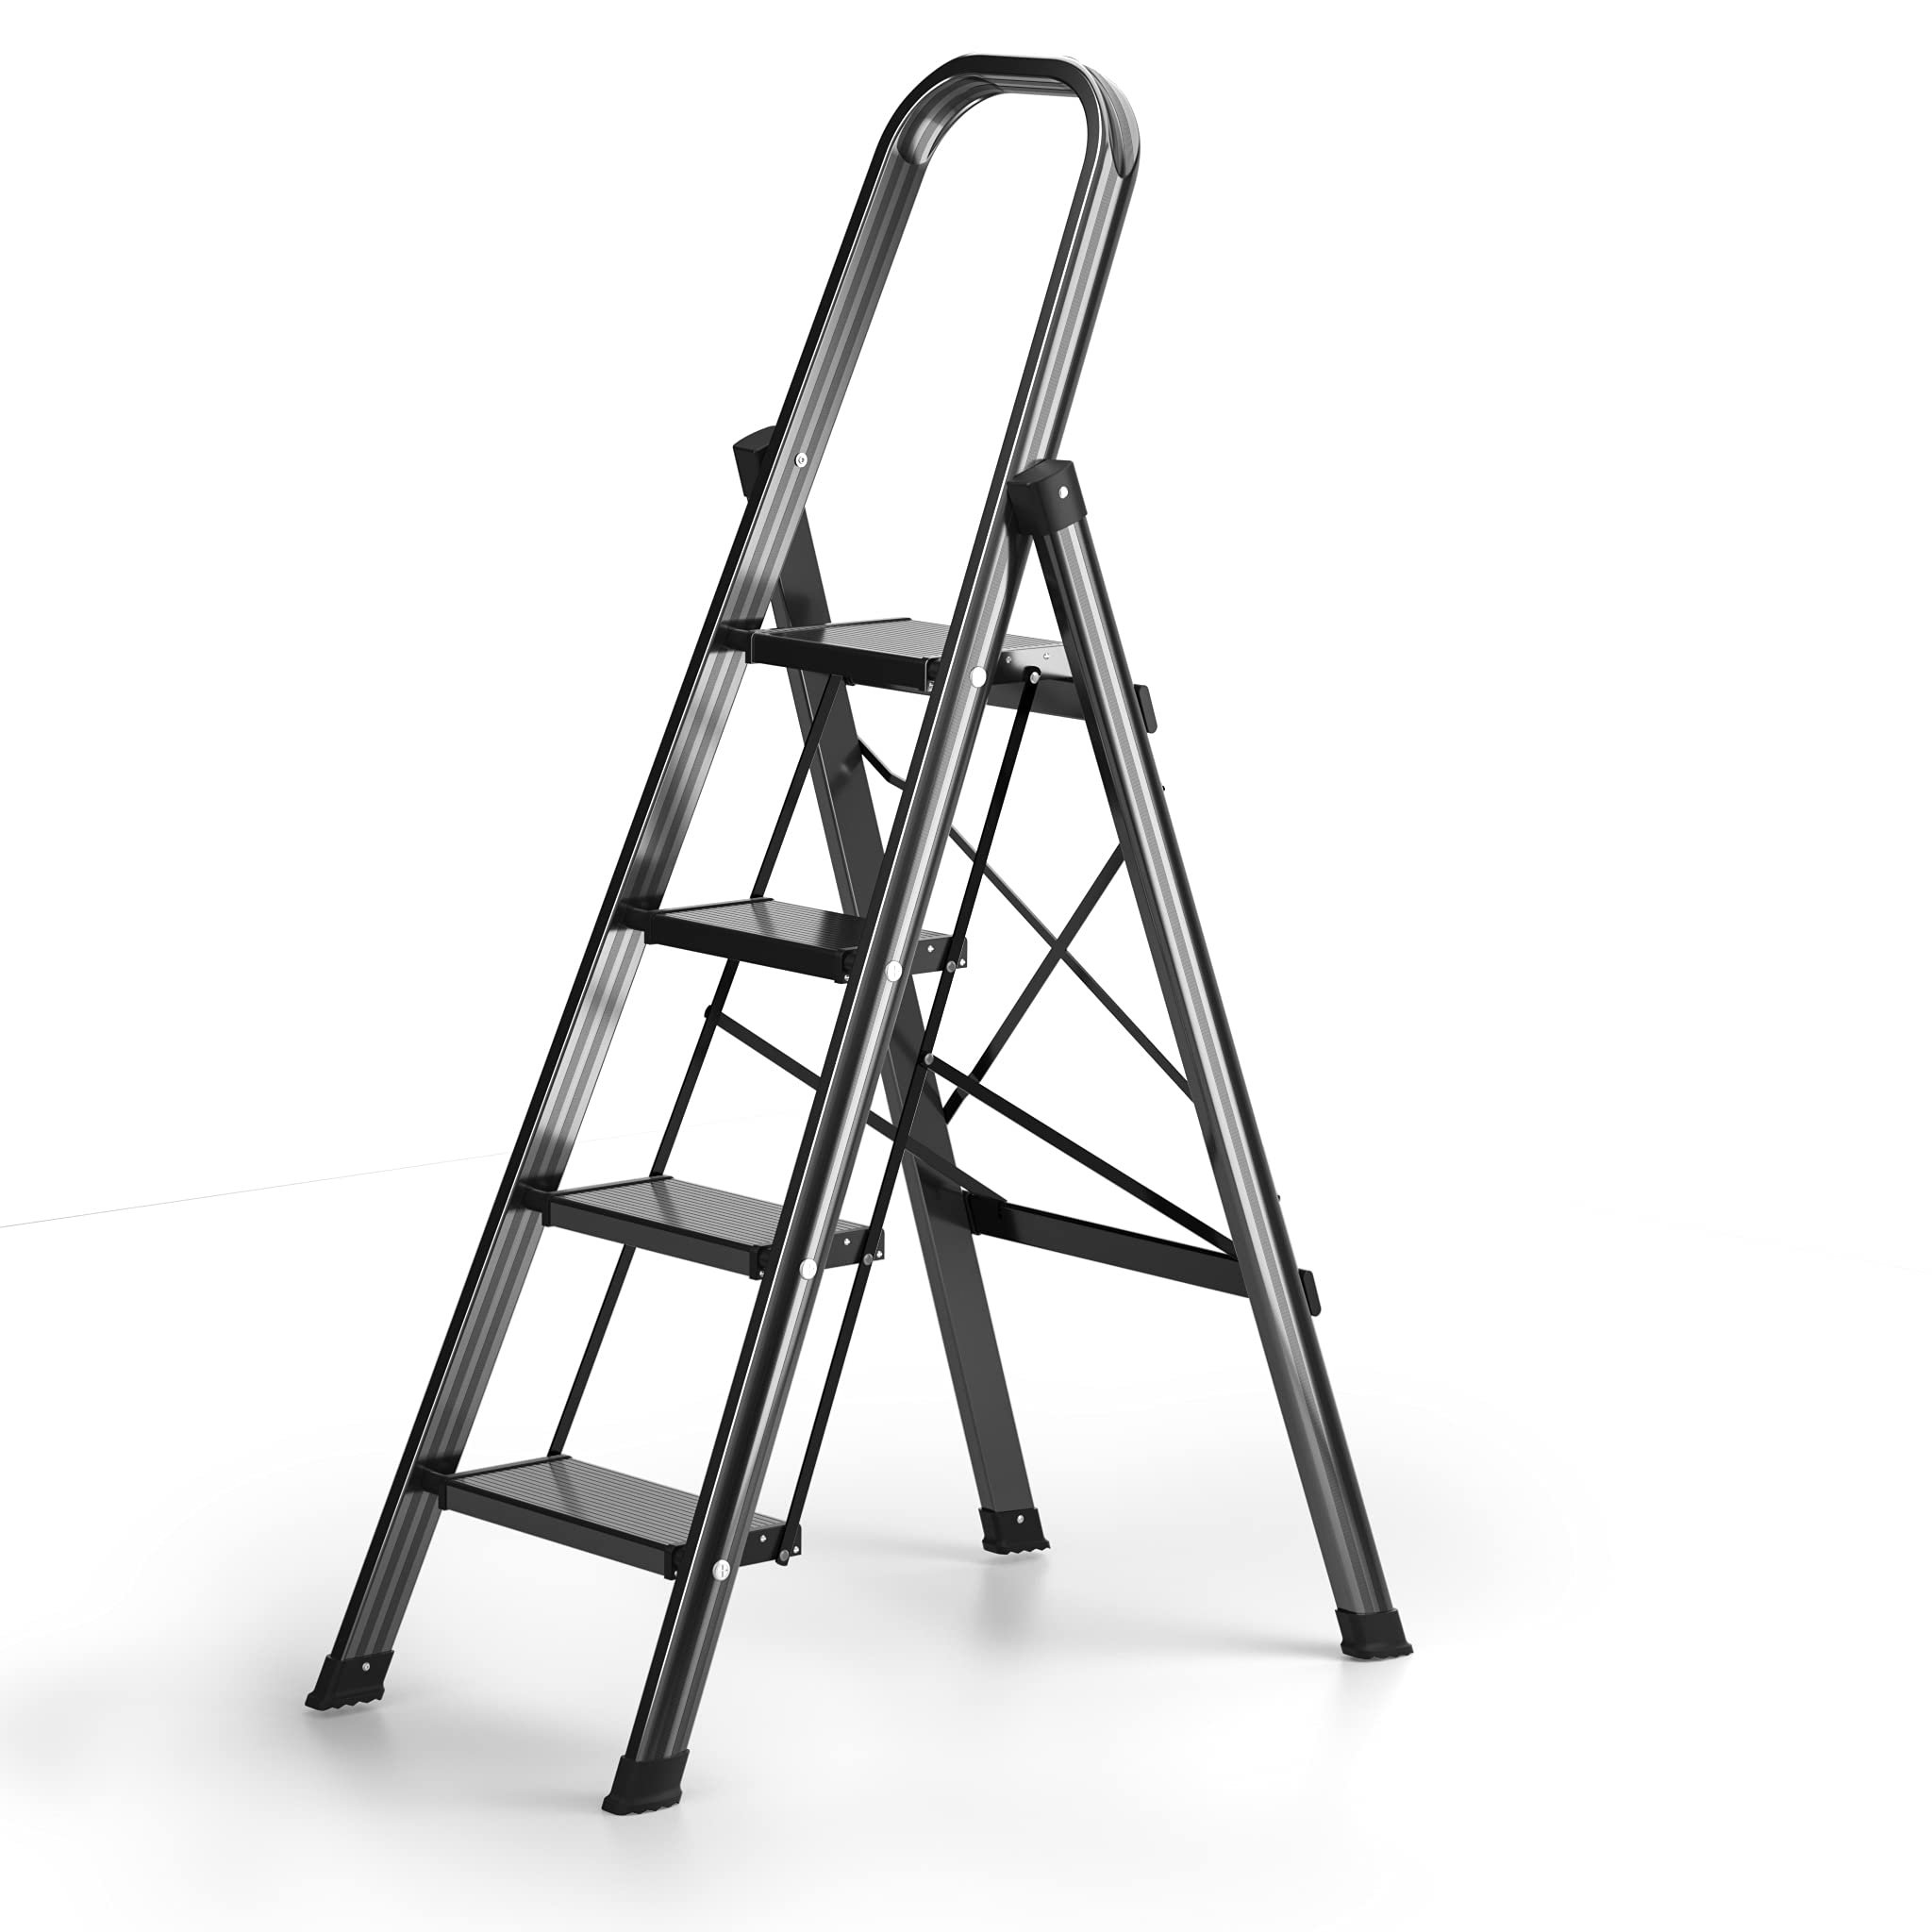 Kitchen Use White 3 Step Ladder Office Portable Foldable Industrial Steel Ladders with Convenient Handgrip Folding Step Stool with Anti-Slip Pedal for Home